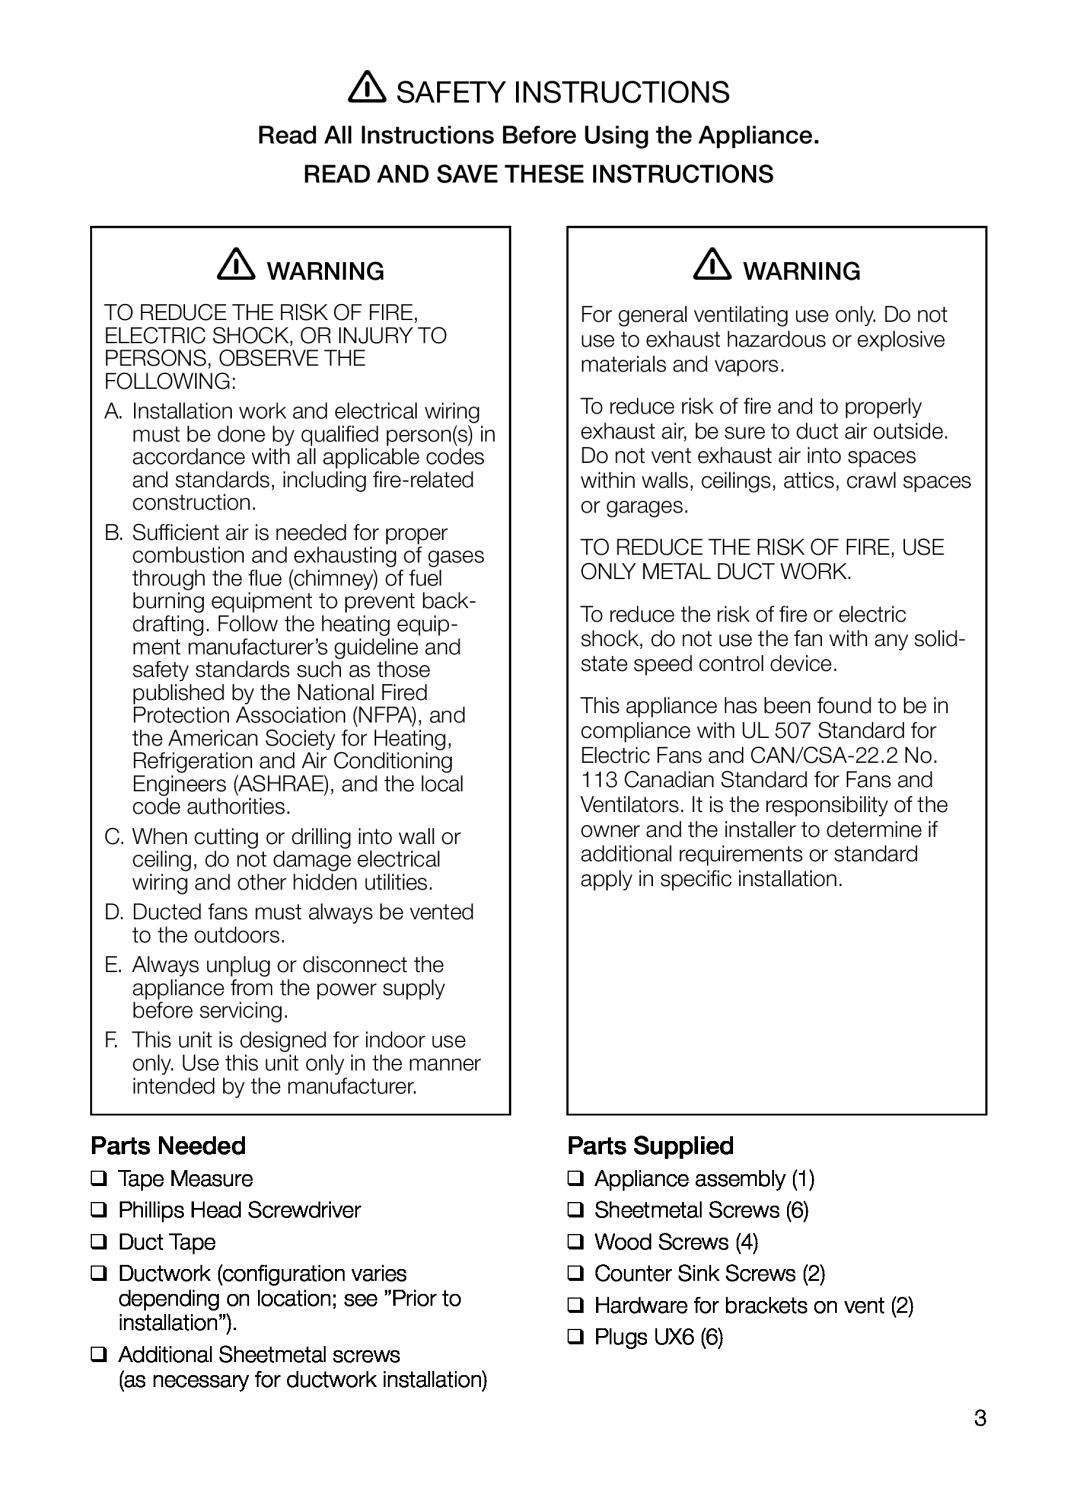 Thermador HMCN36FS Safety Instructions, Read All Instructions Before Using the Appliance, Read And Save These Instructions 